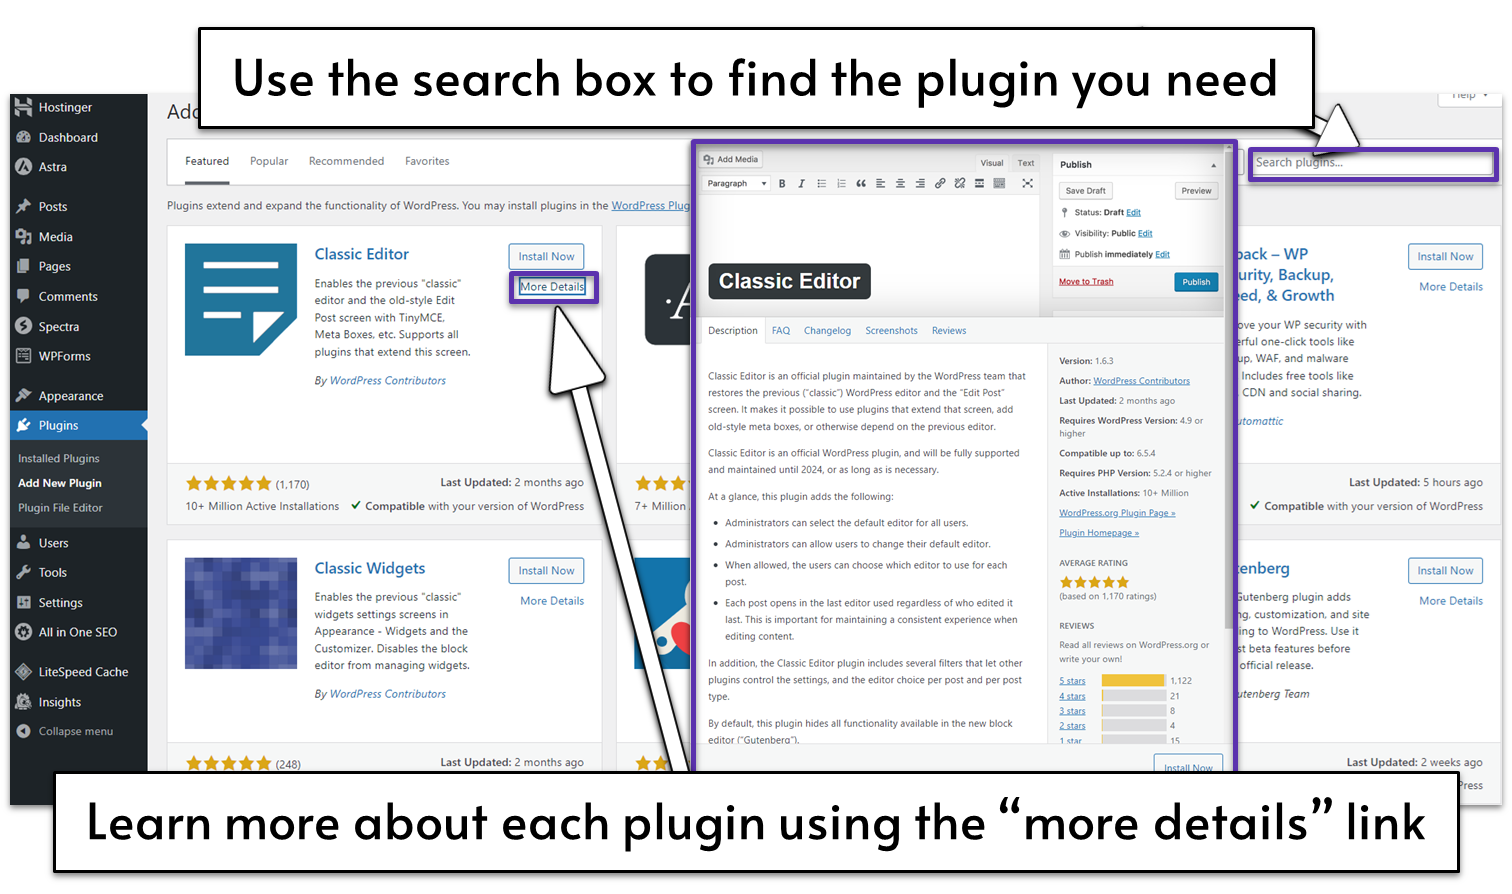 Searching for plugins in WordPress